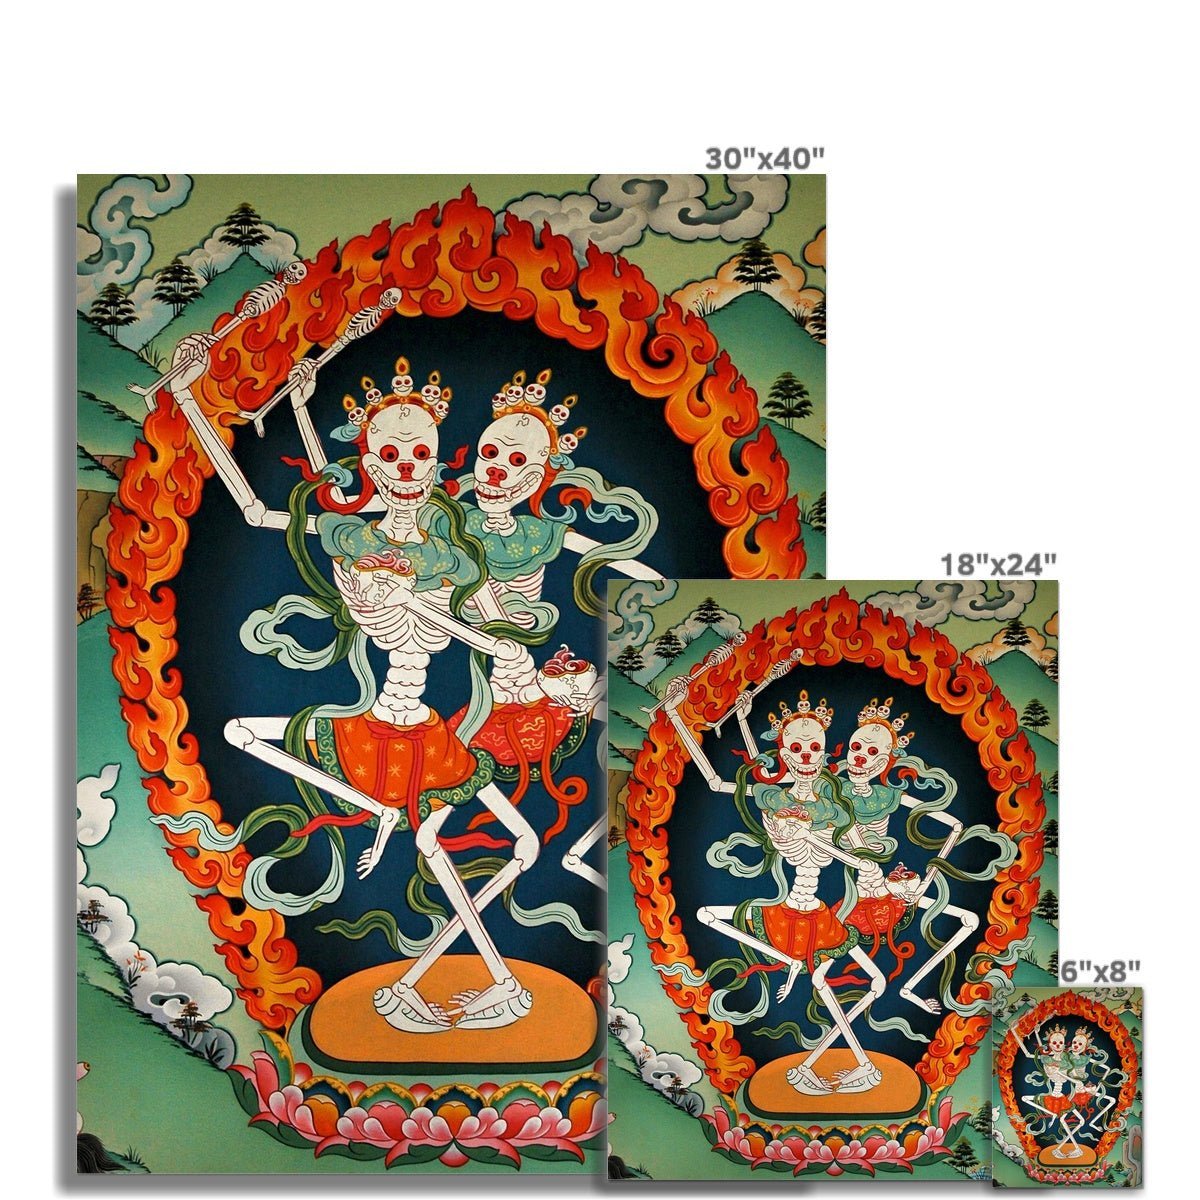 giclee A4 Portrait Citipati, Tibetan Skeleton | Tantric Protector Vajrayana Thangka | Lord and Lady of the Cemetery | Buddhist Decor Fine Art Print